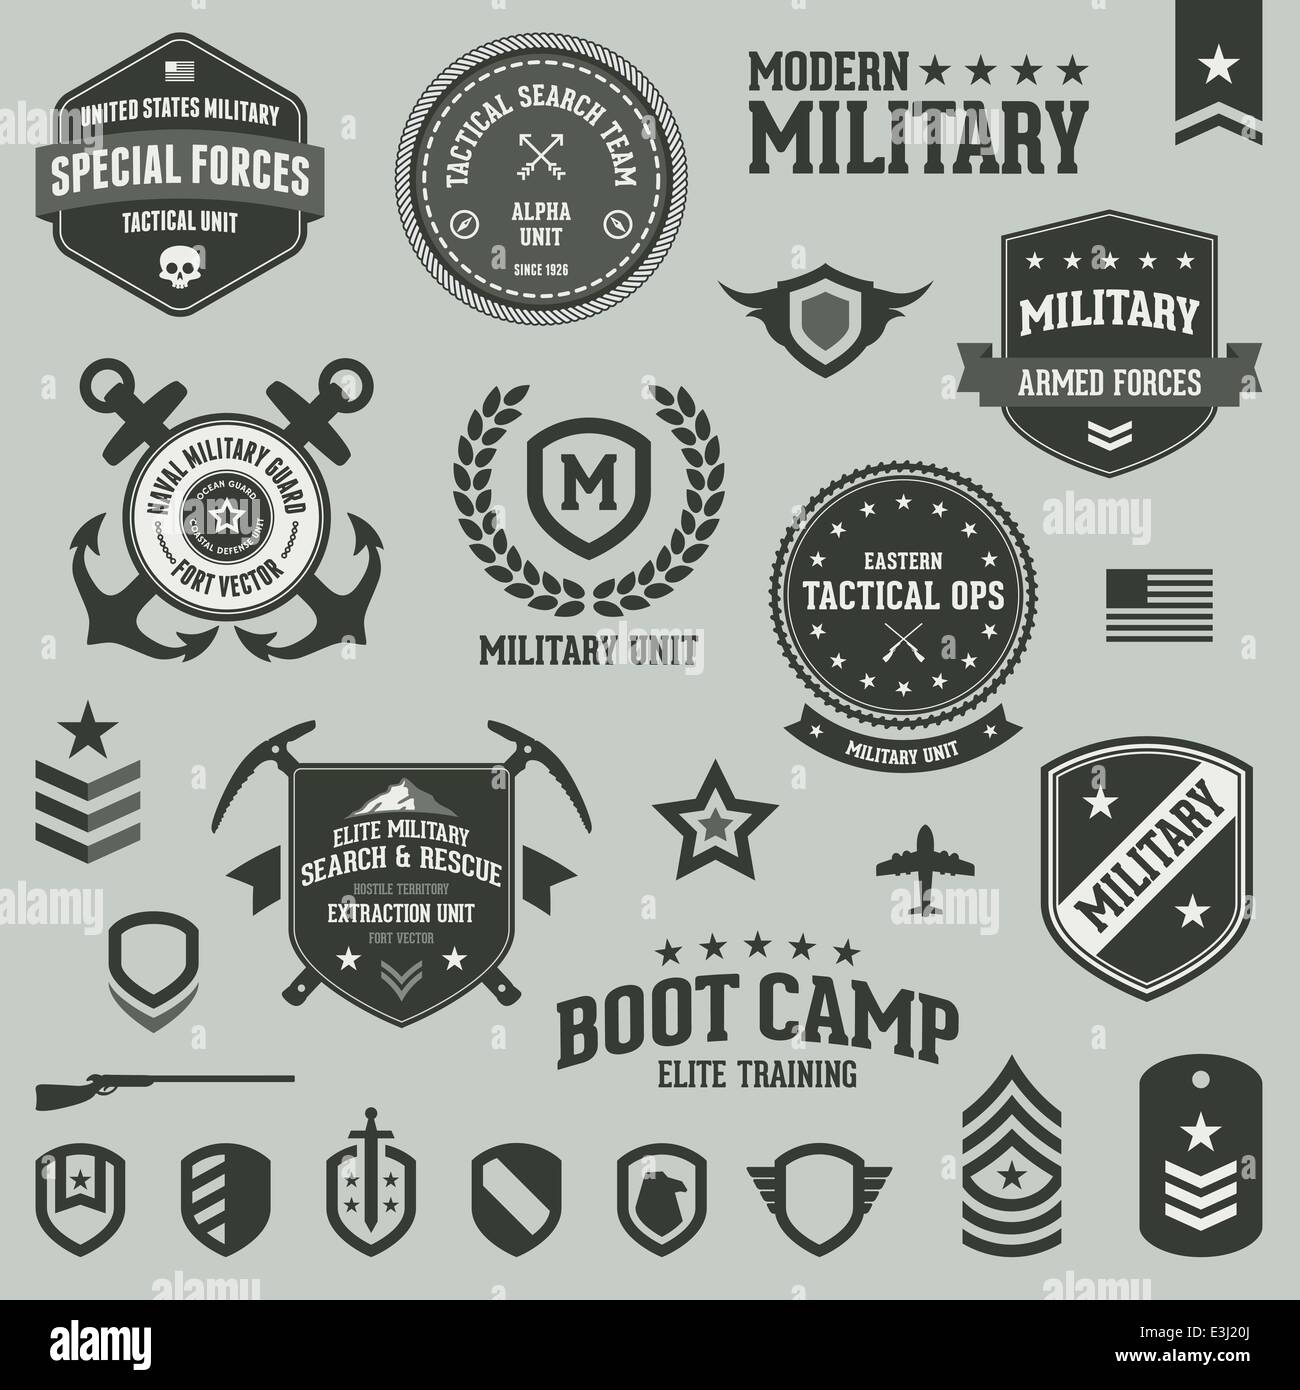 Set of military and armed forces badges and labels Stock Vector